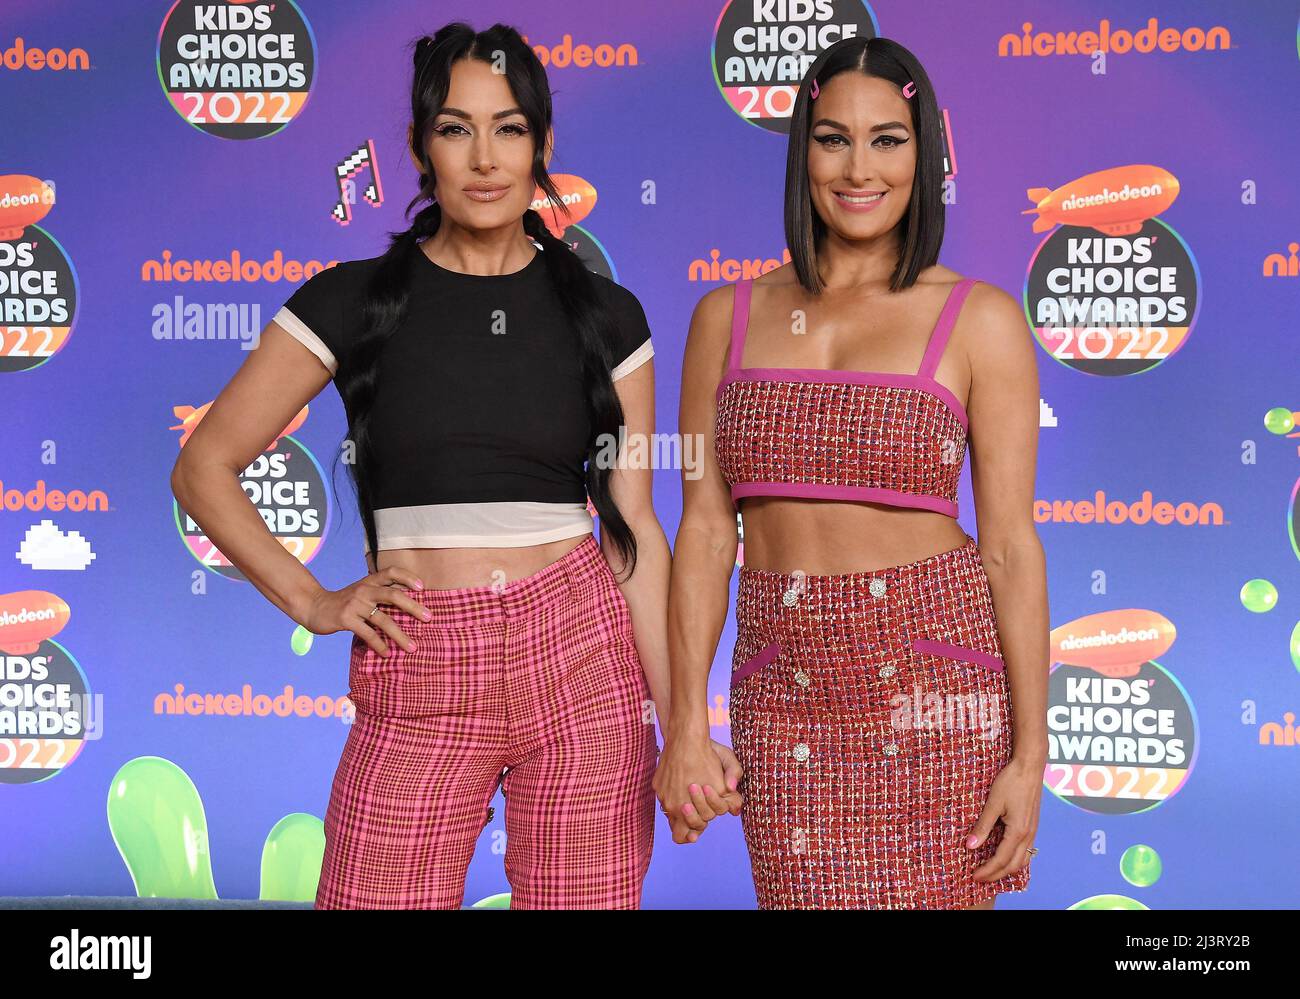 Wrestlers Nikki Bella (L) and Brie Bella arrive for the 44th annual E!  People's Choice Awards at the Barker Hangar in Santa Monica, California on  November 11, 2018. Photo by Jim Ruymen/UPI